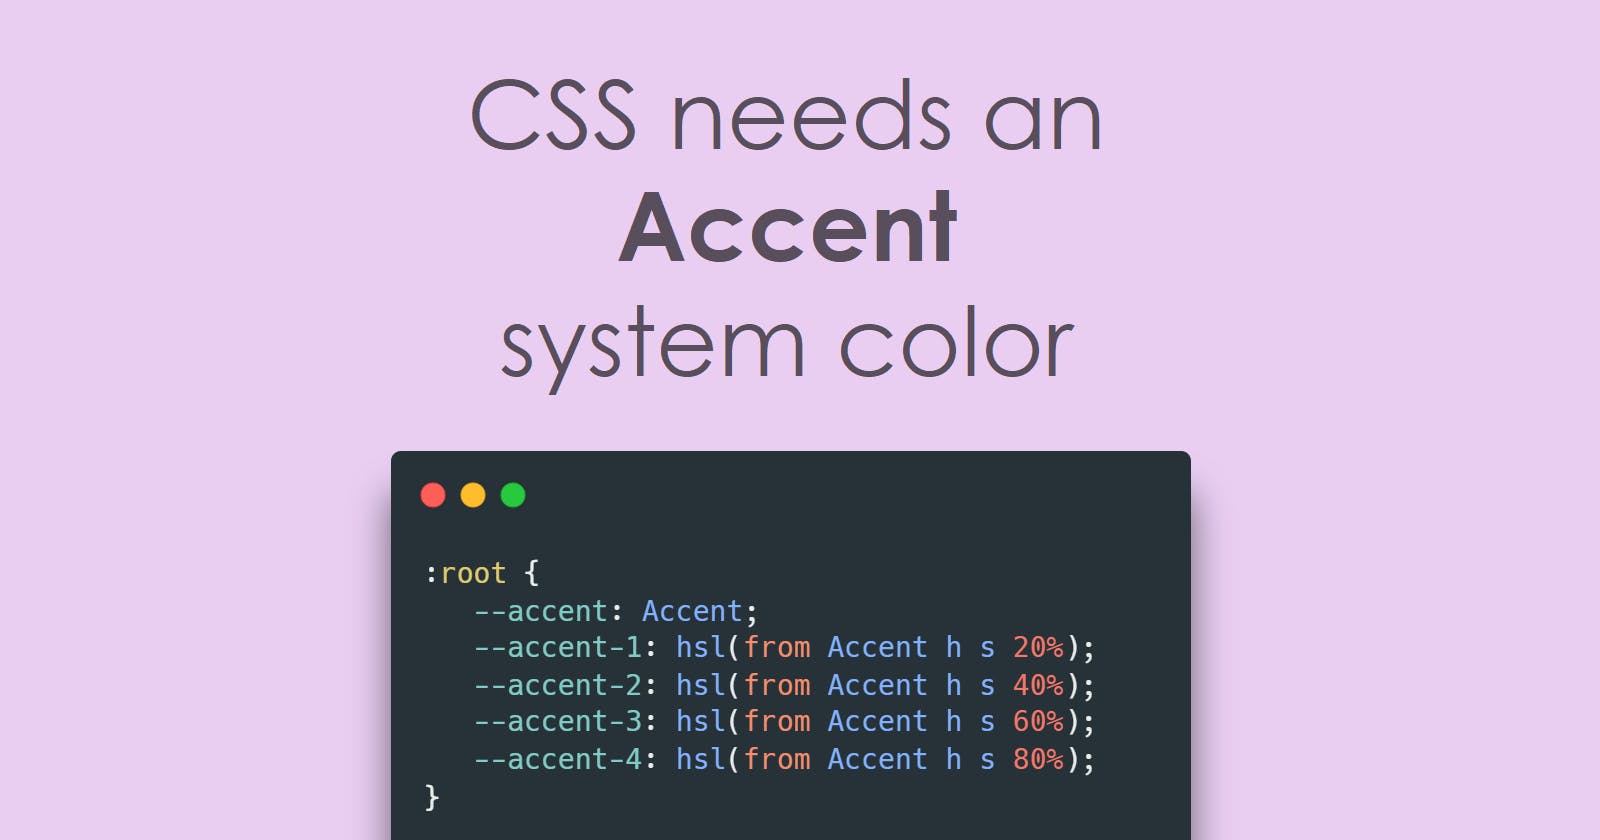 CSS needs an Accent system color